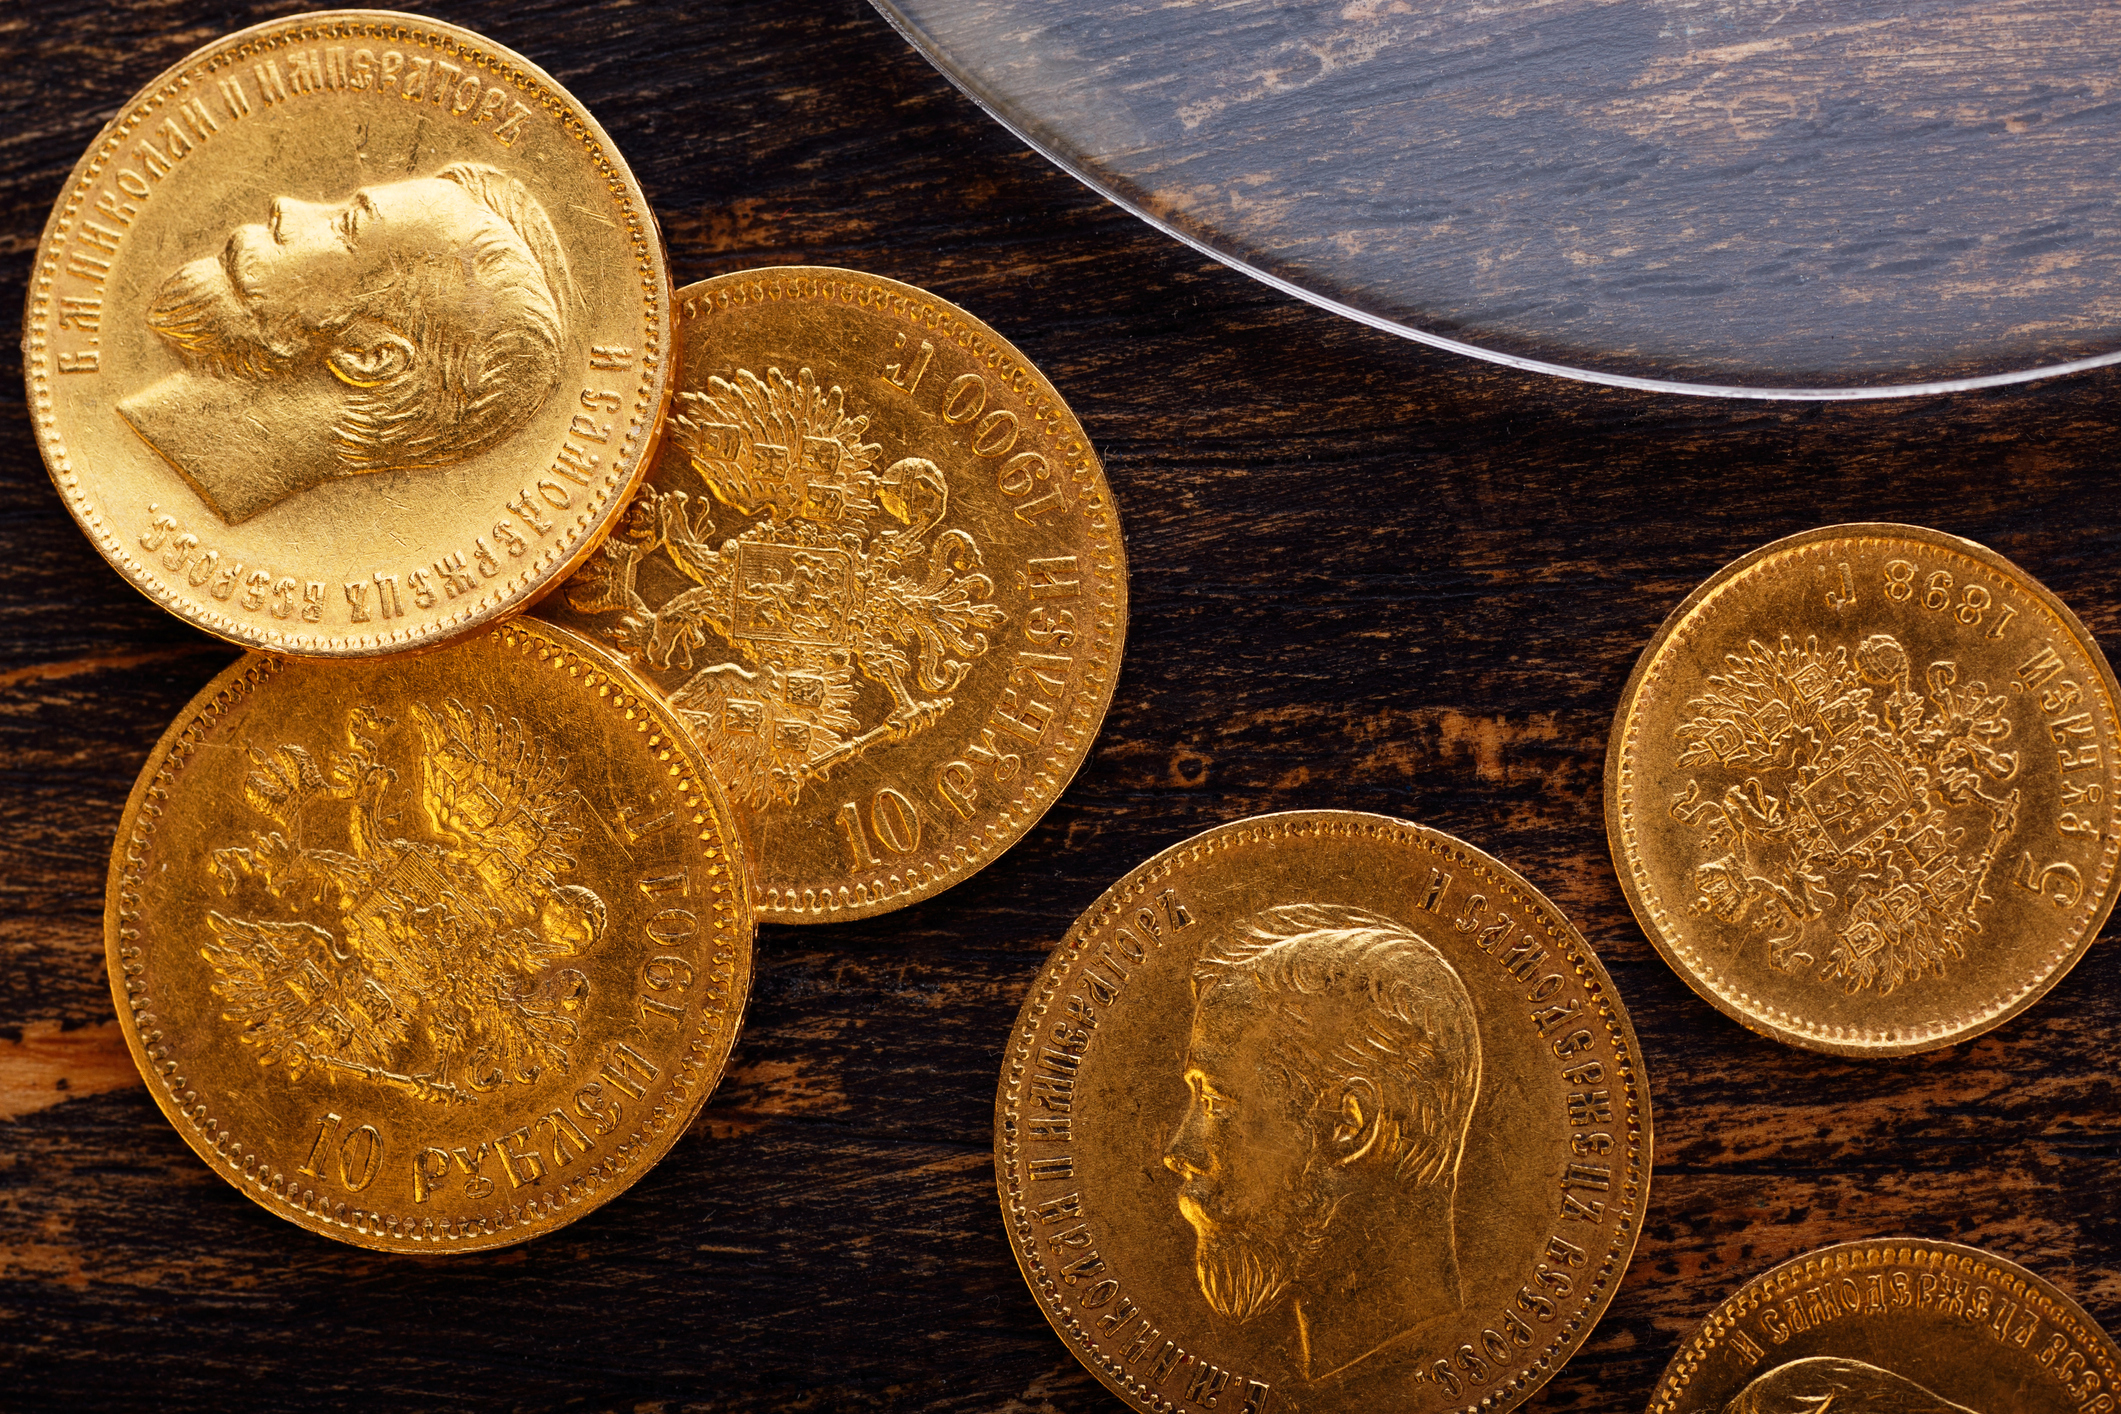 The Most Valuable Coins That Serious Collectors Want | American Collectors Insurance